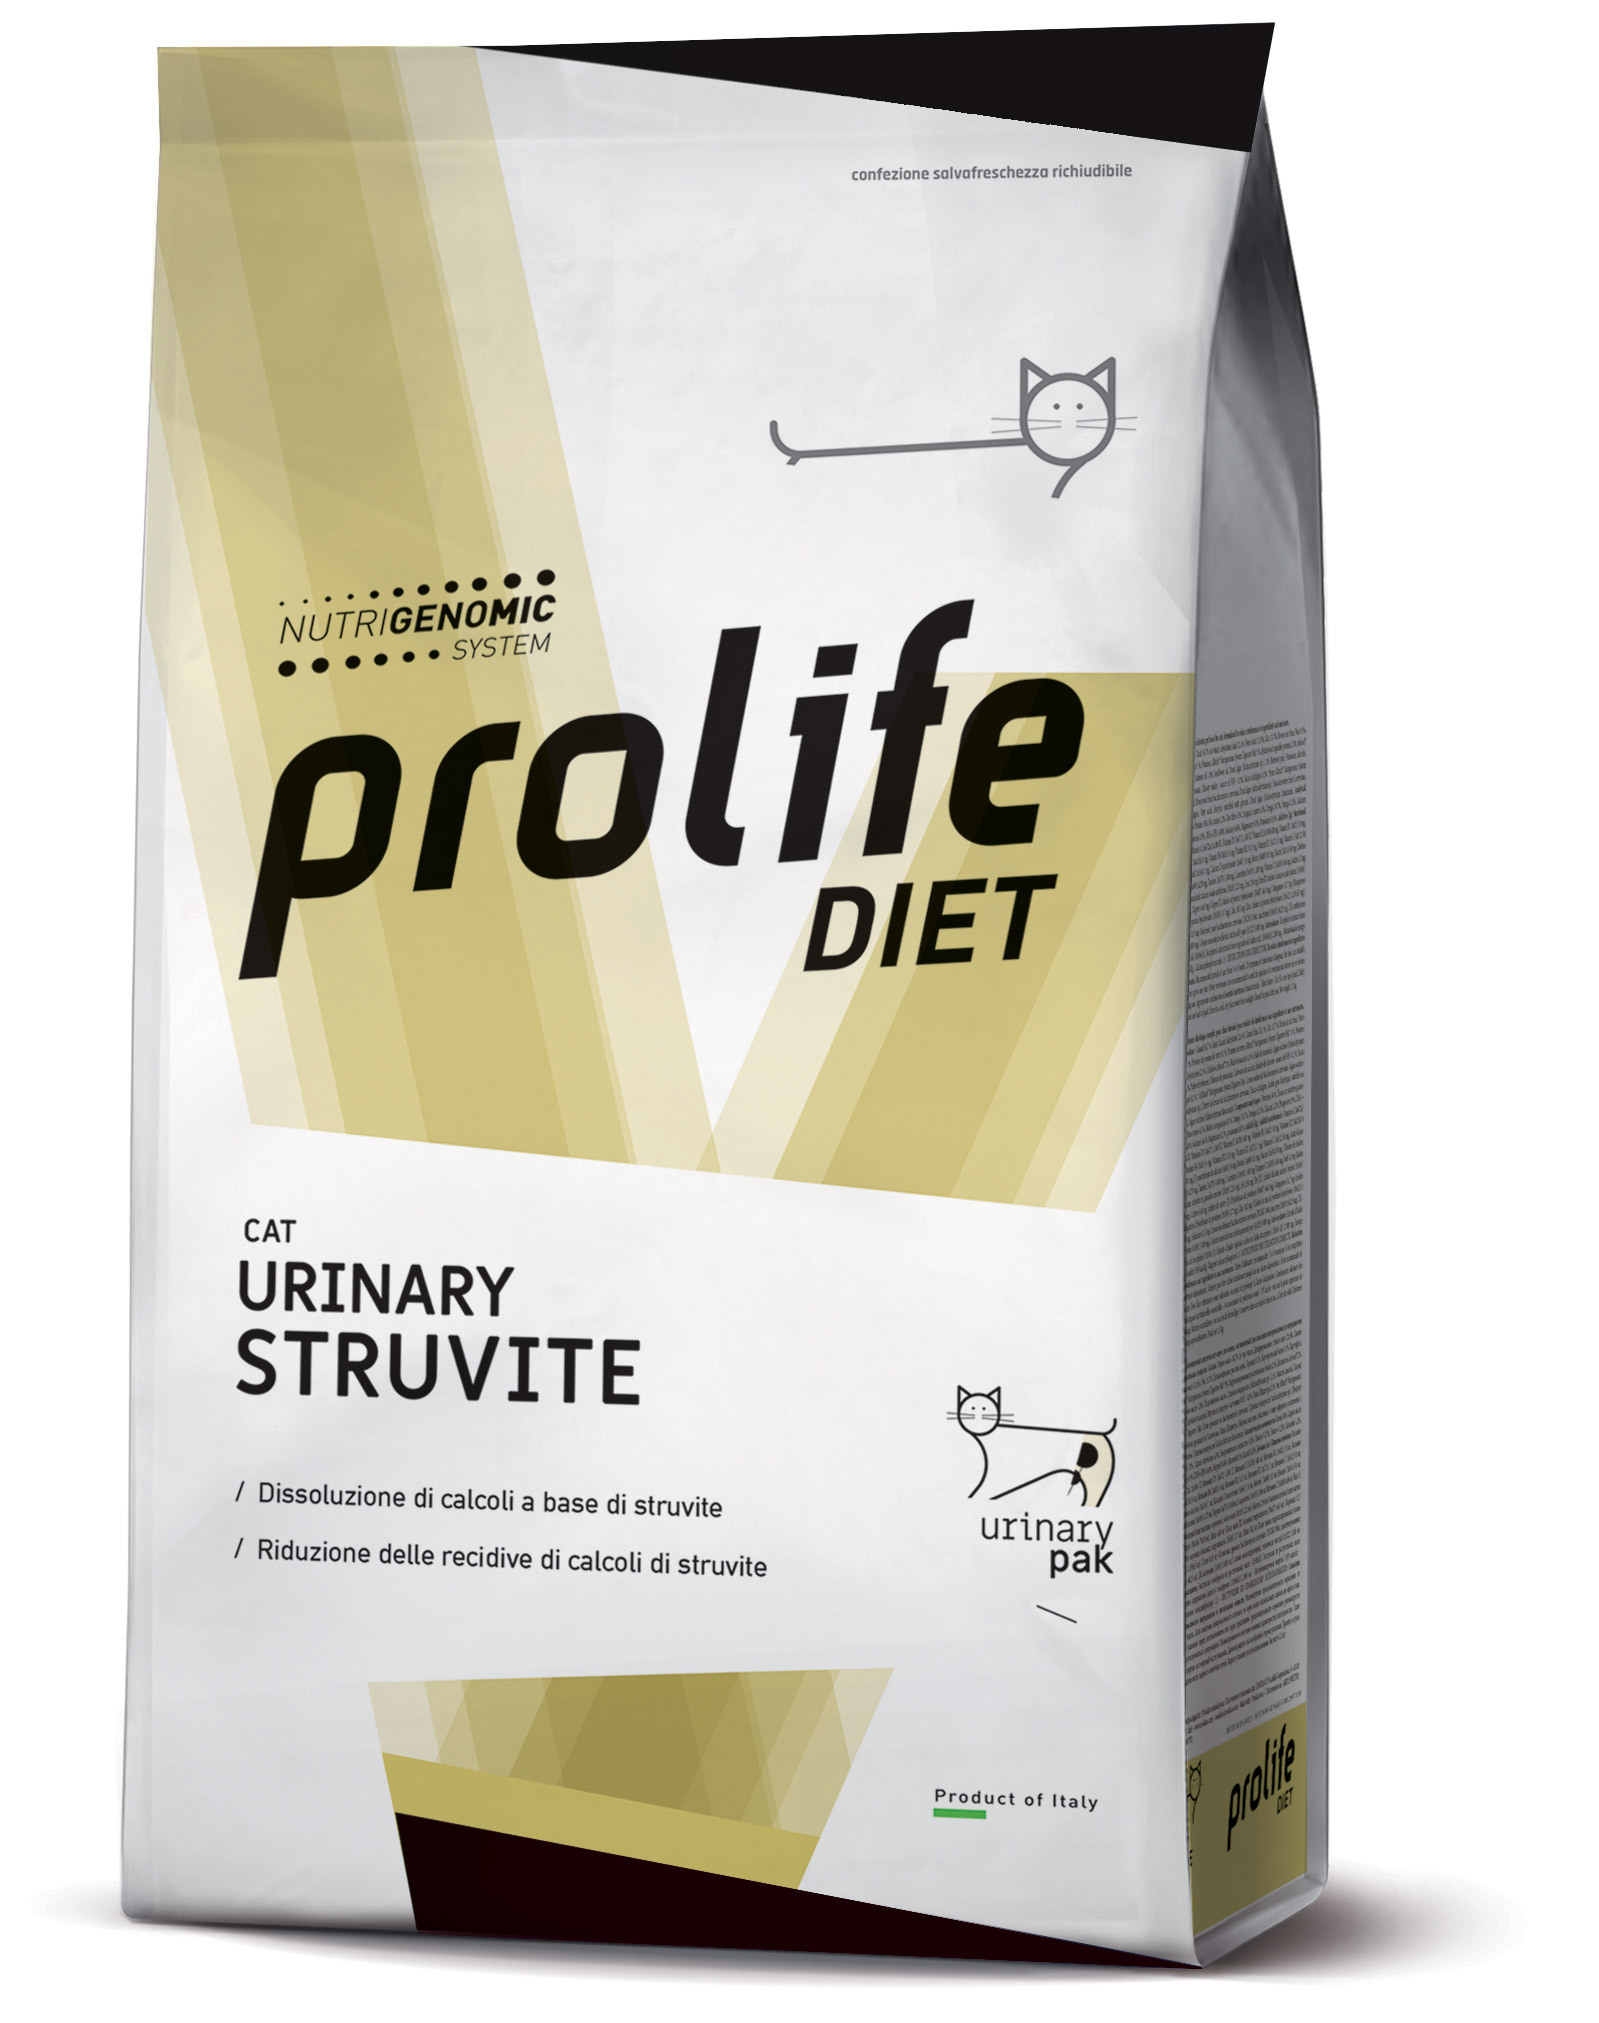 Complete dietetic pet food for cats suffering from gastrointestinal disorders.
